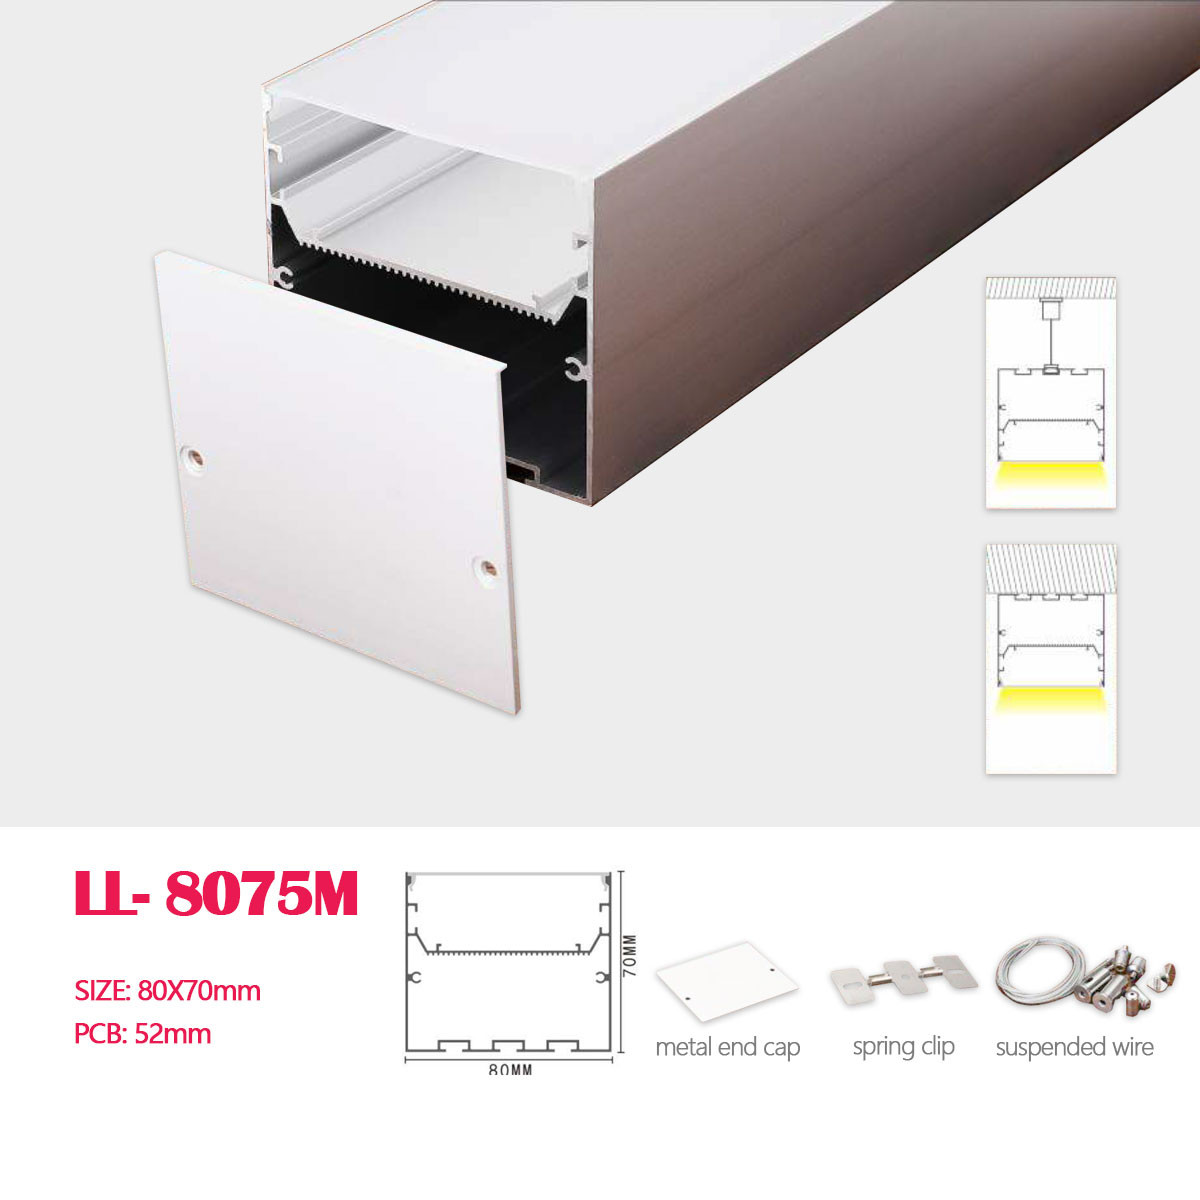 1M (3.28FT) 80MM*70MM Square Double-layer Aluminum Profile with Flat PC cover and clips, Suspended Mounting with Pendant Hardware for Hanging or Surface Mounted LED Linear Light